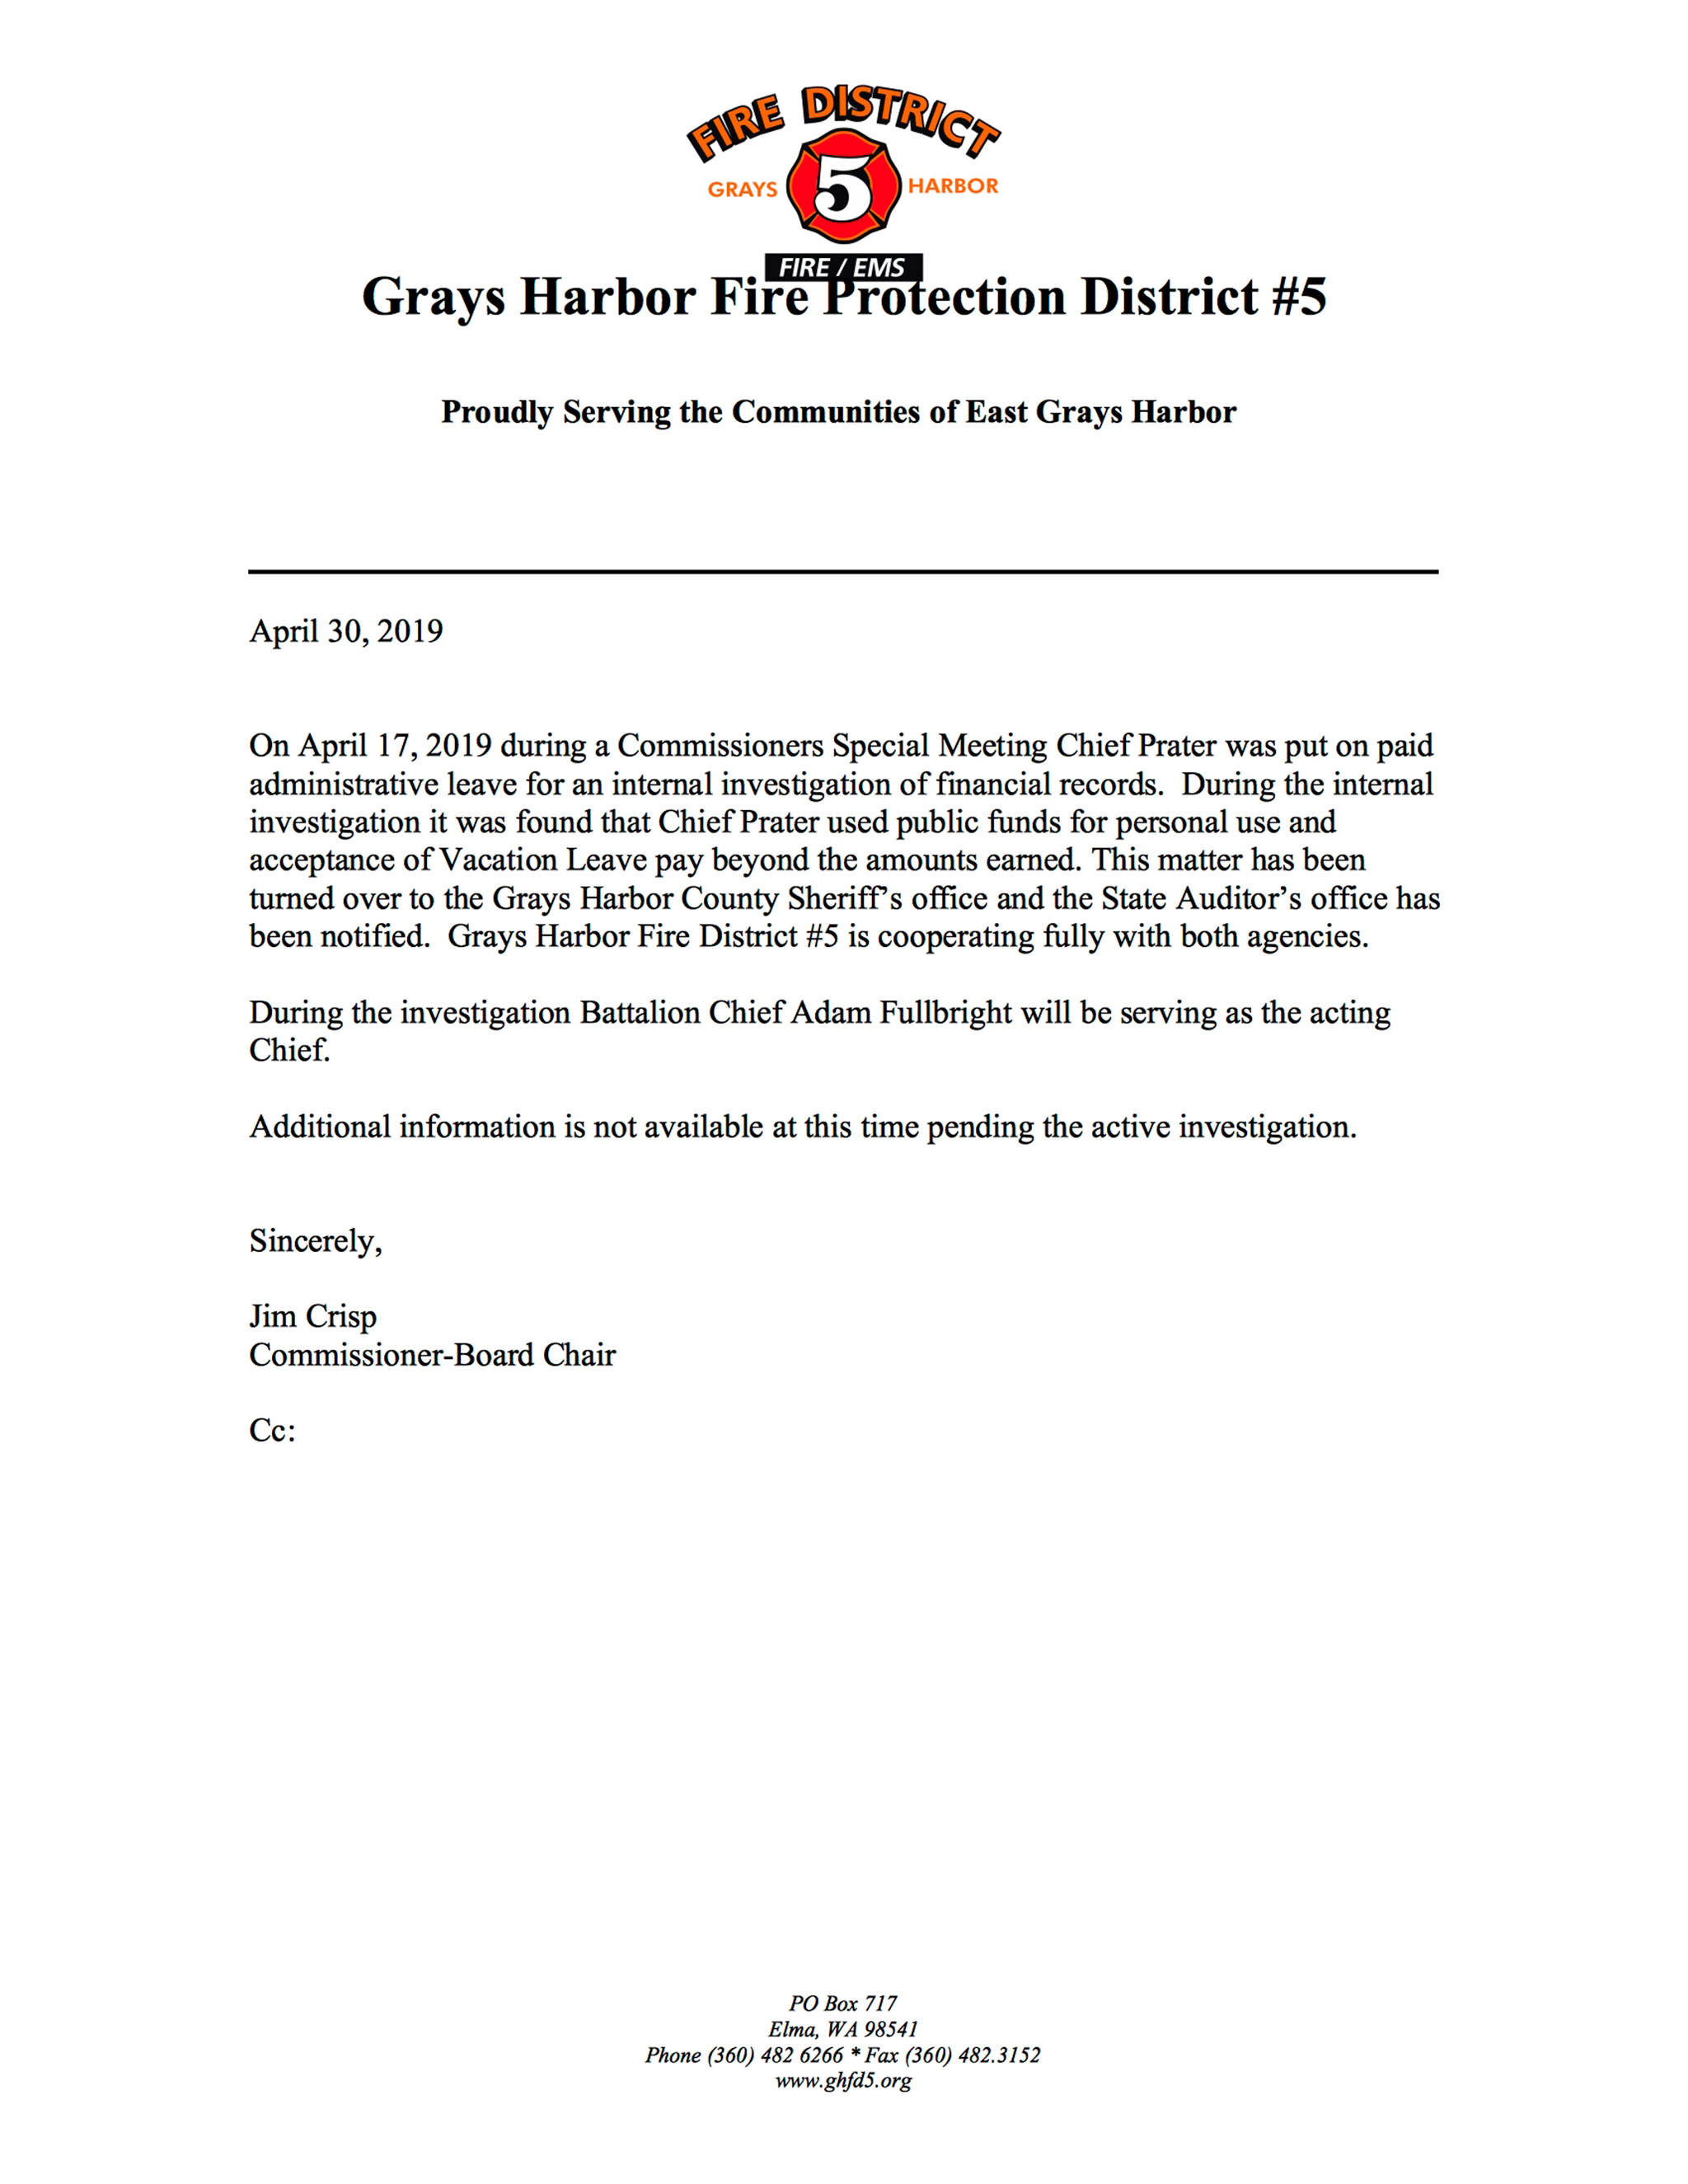 This release from Grays Harbor Fire District 5 sent late Tuesday night, April 30, describes details about the placement of Chief Dan Prater on leave.